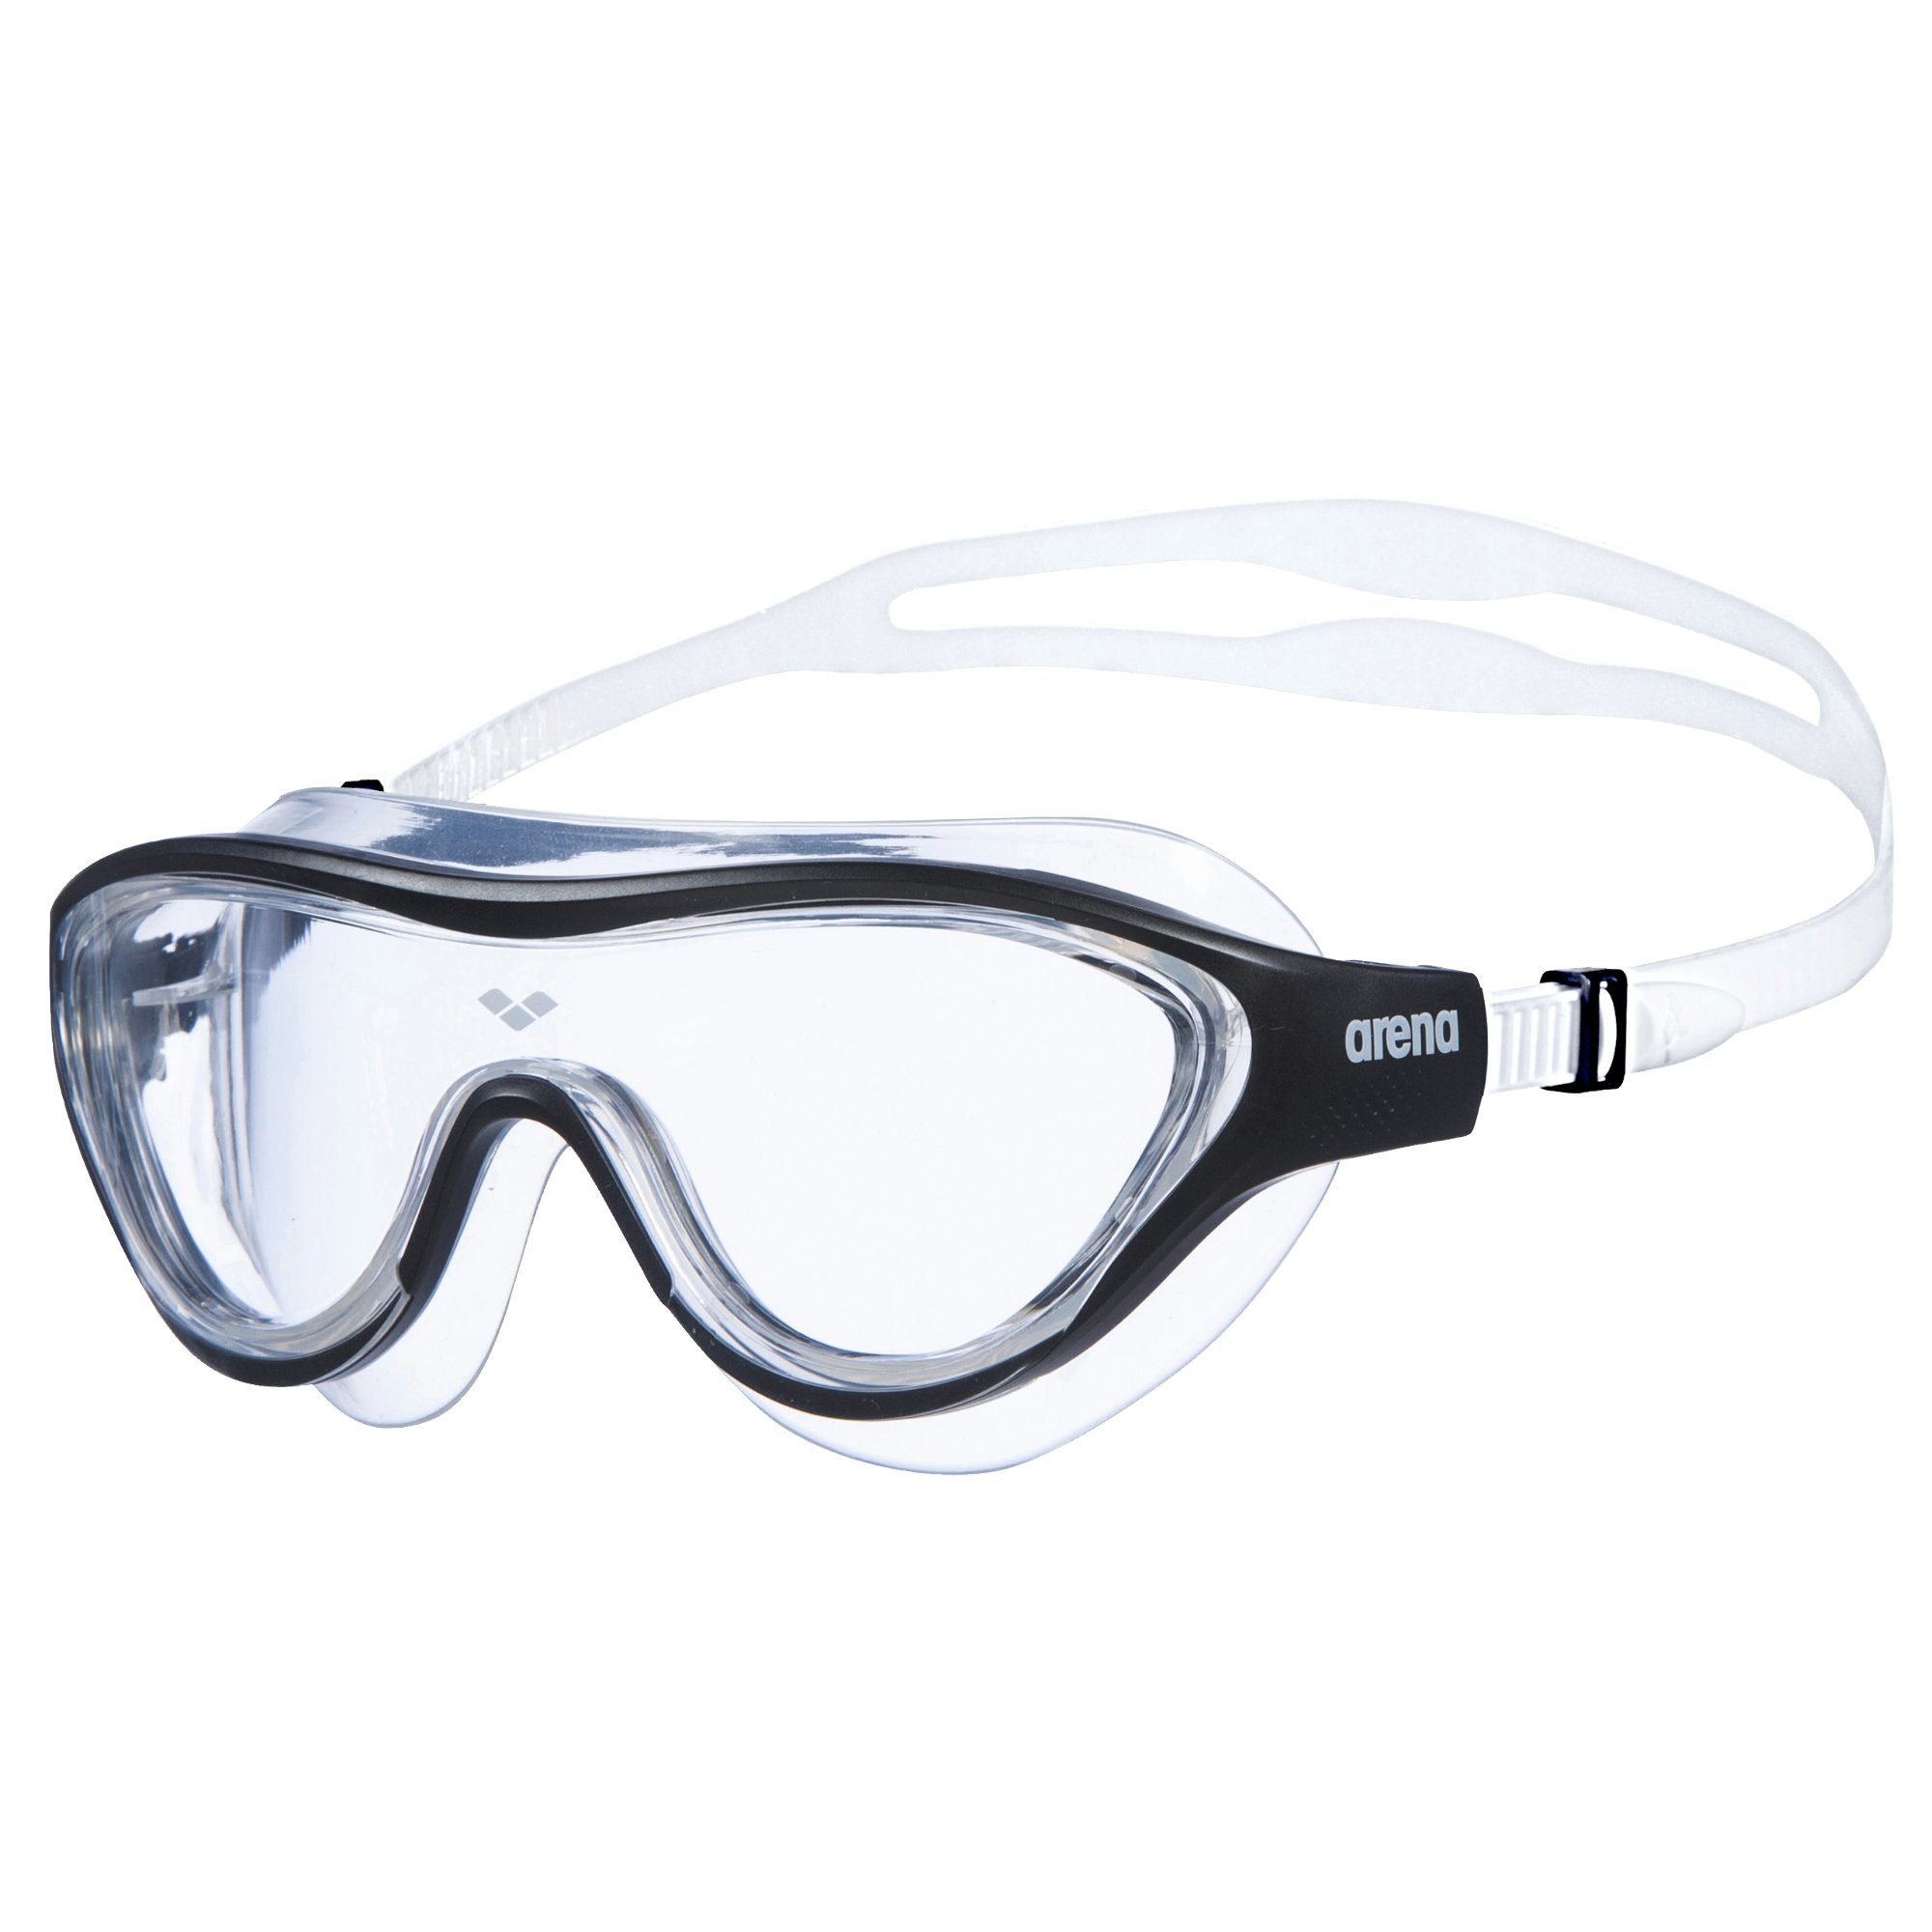 The Schwimmbrille clear-black-transparant Mask One arena Arena